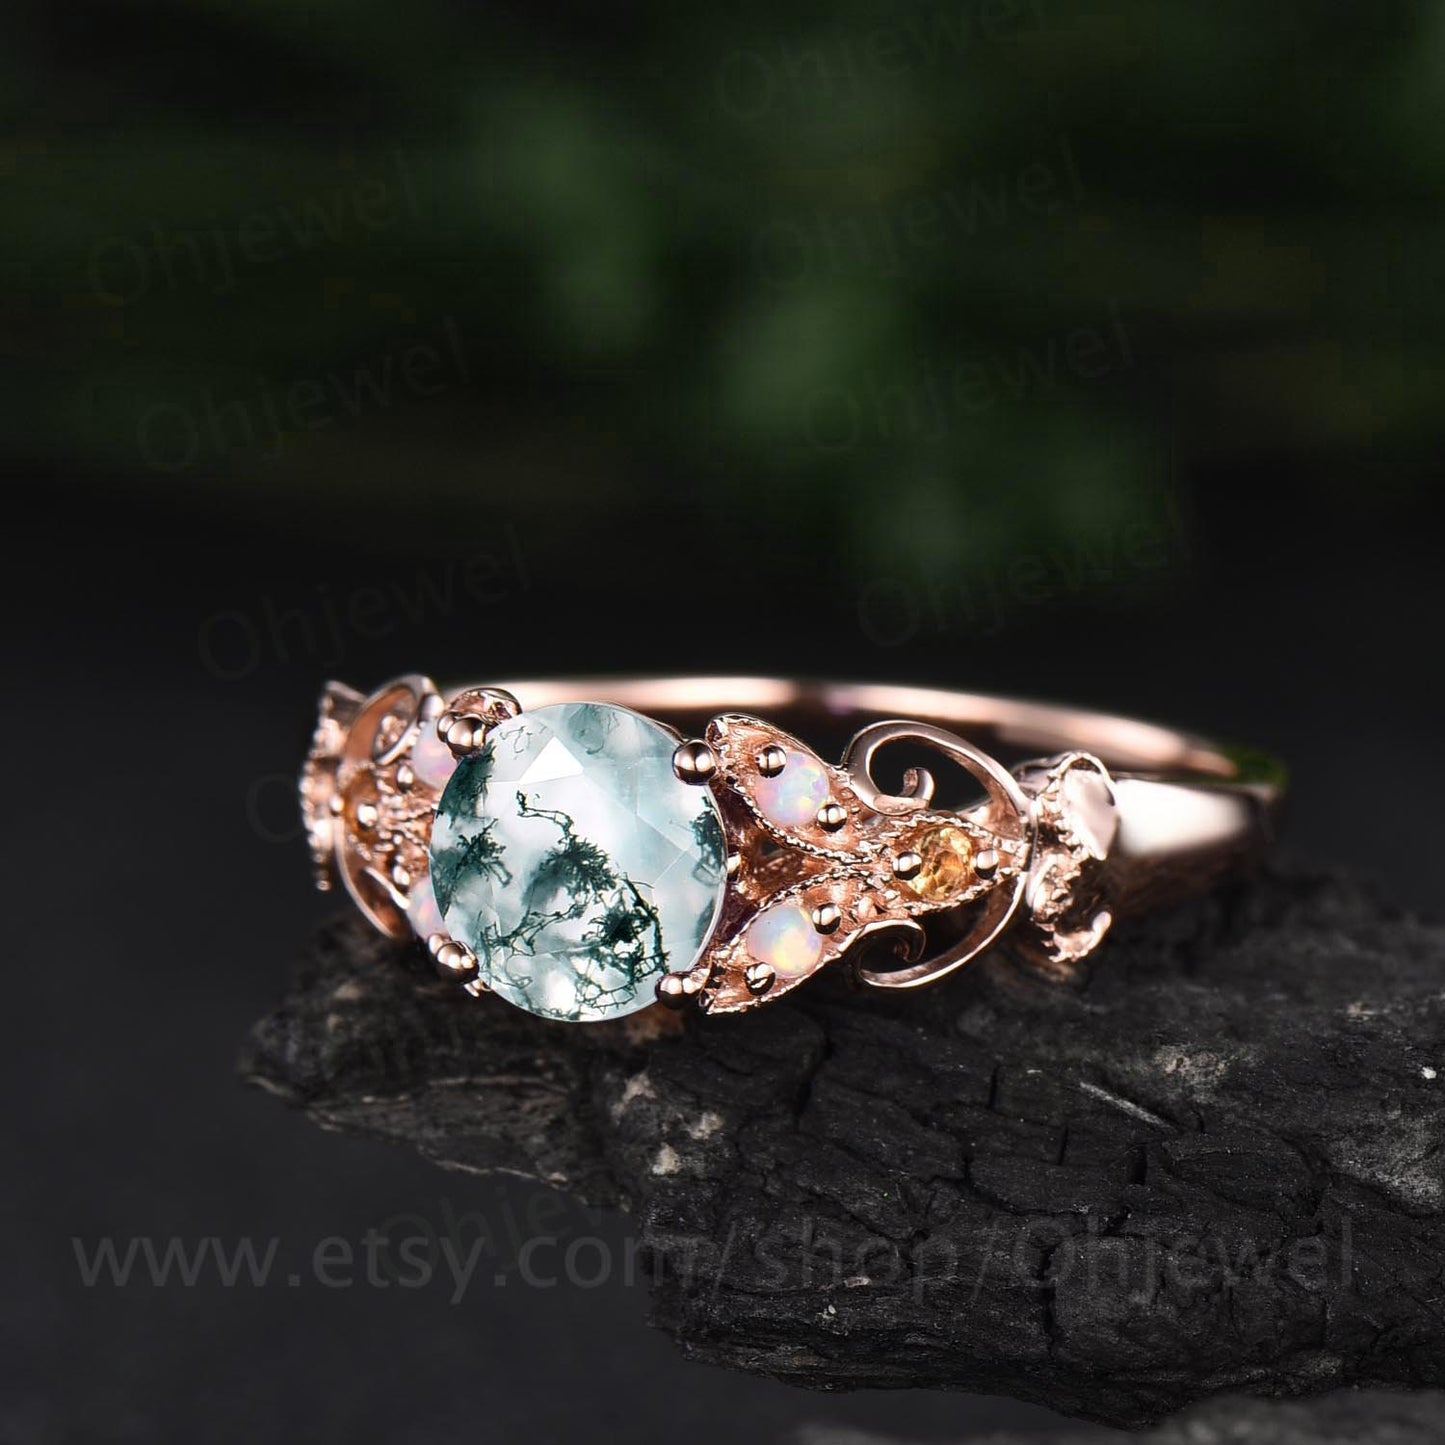 Unique round green moss agate engagement ring art deco vintage opal ring citrine ring milgrain butterfly ring rose gold silver wedding ring